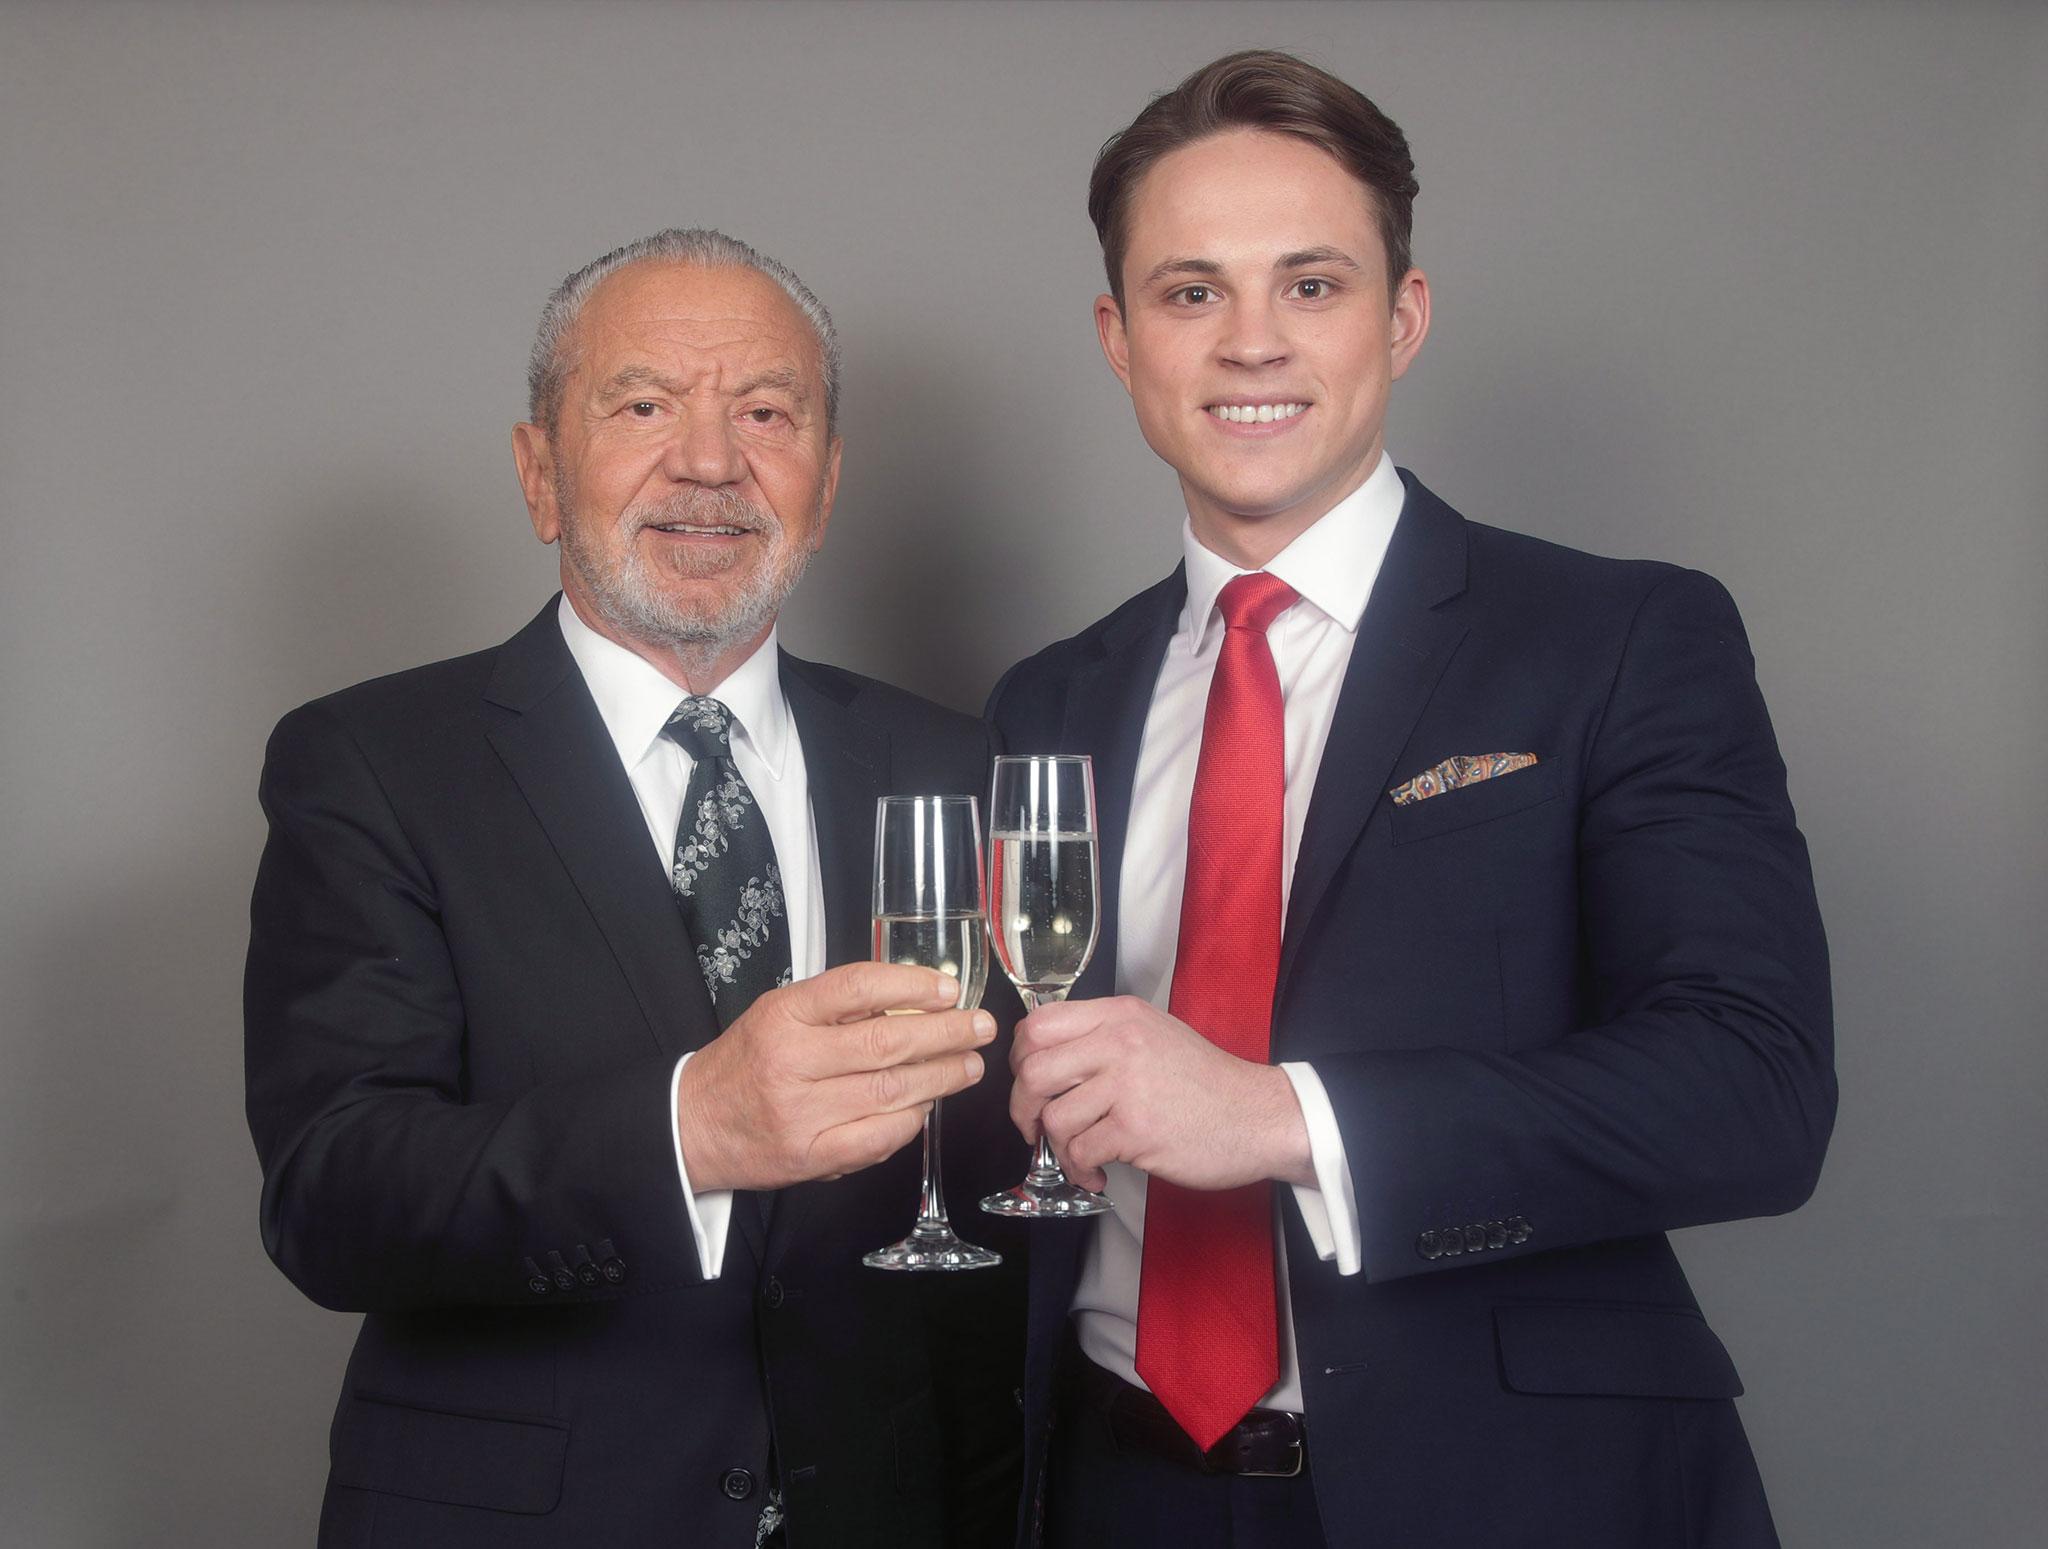 James White celebrates with Lord Sugar after winning The Apprentice last year